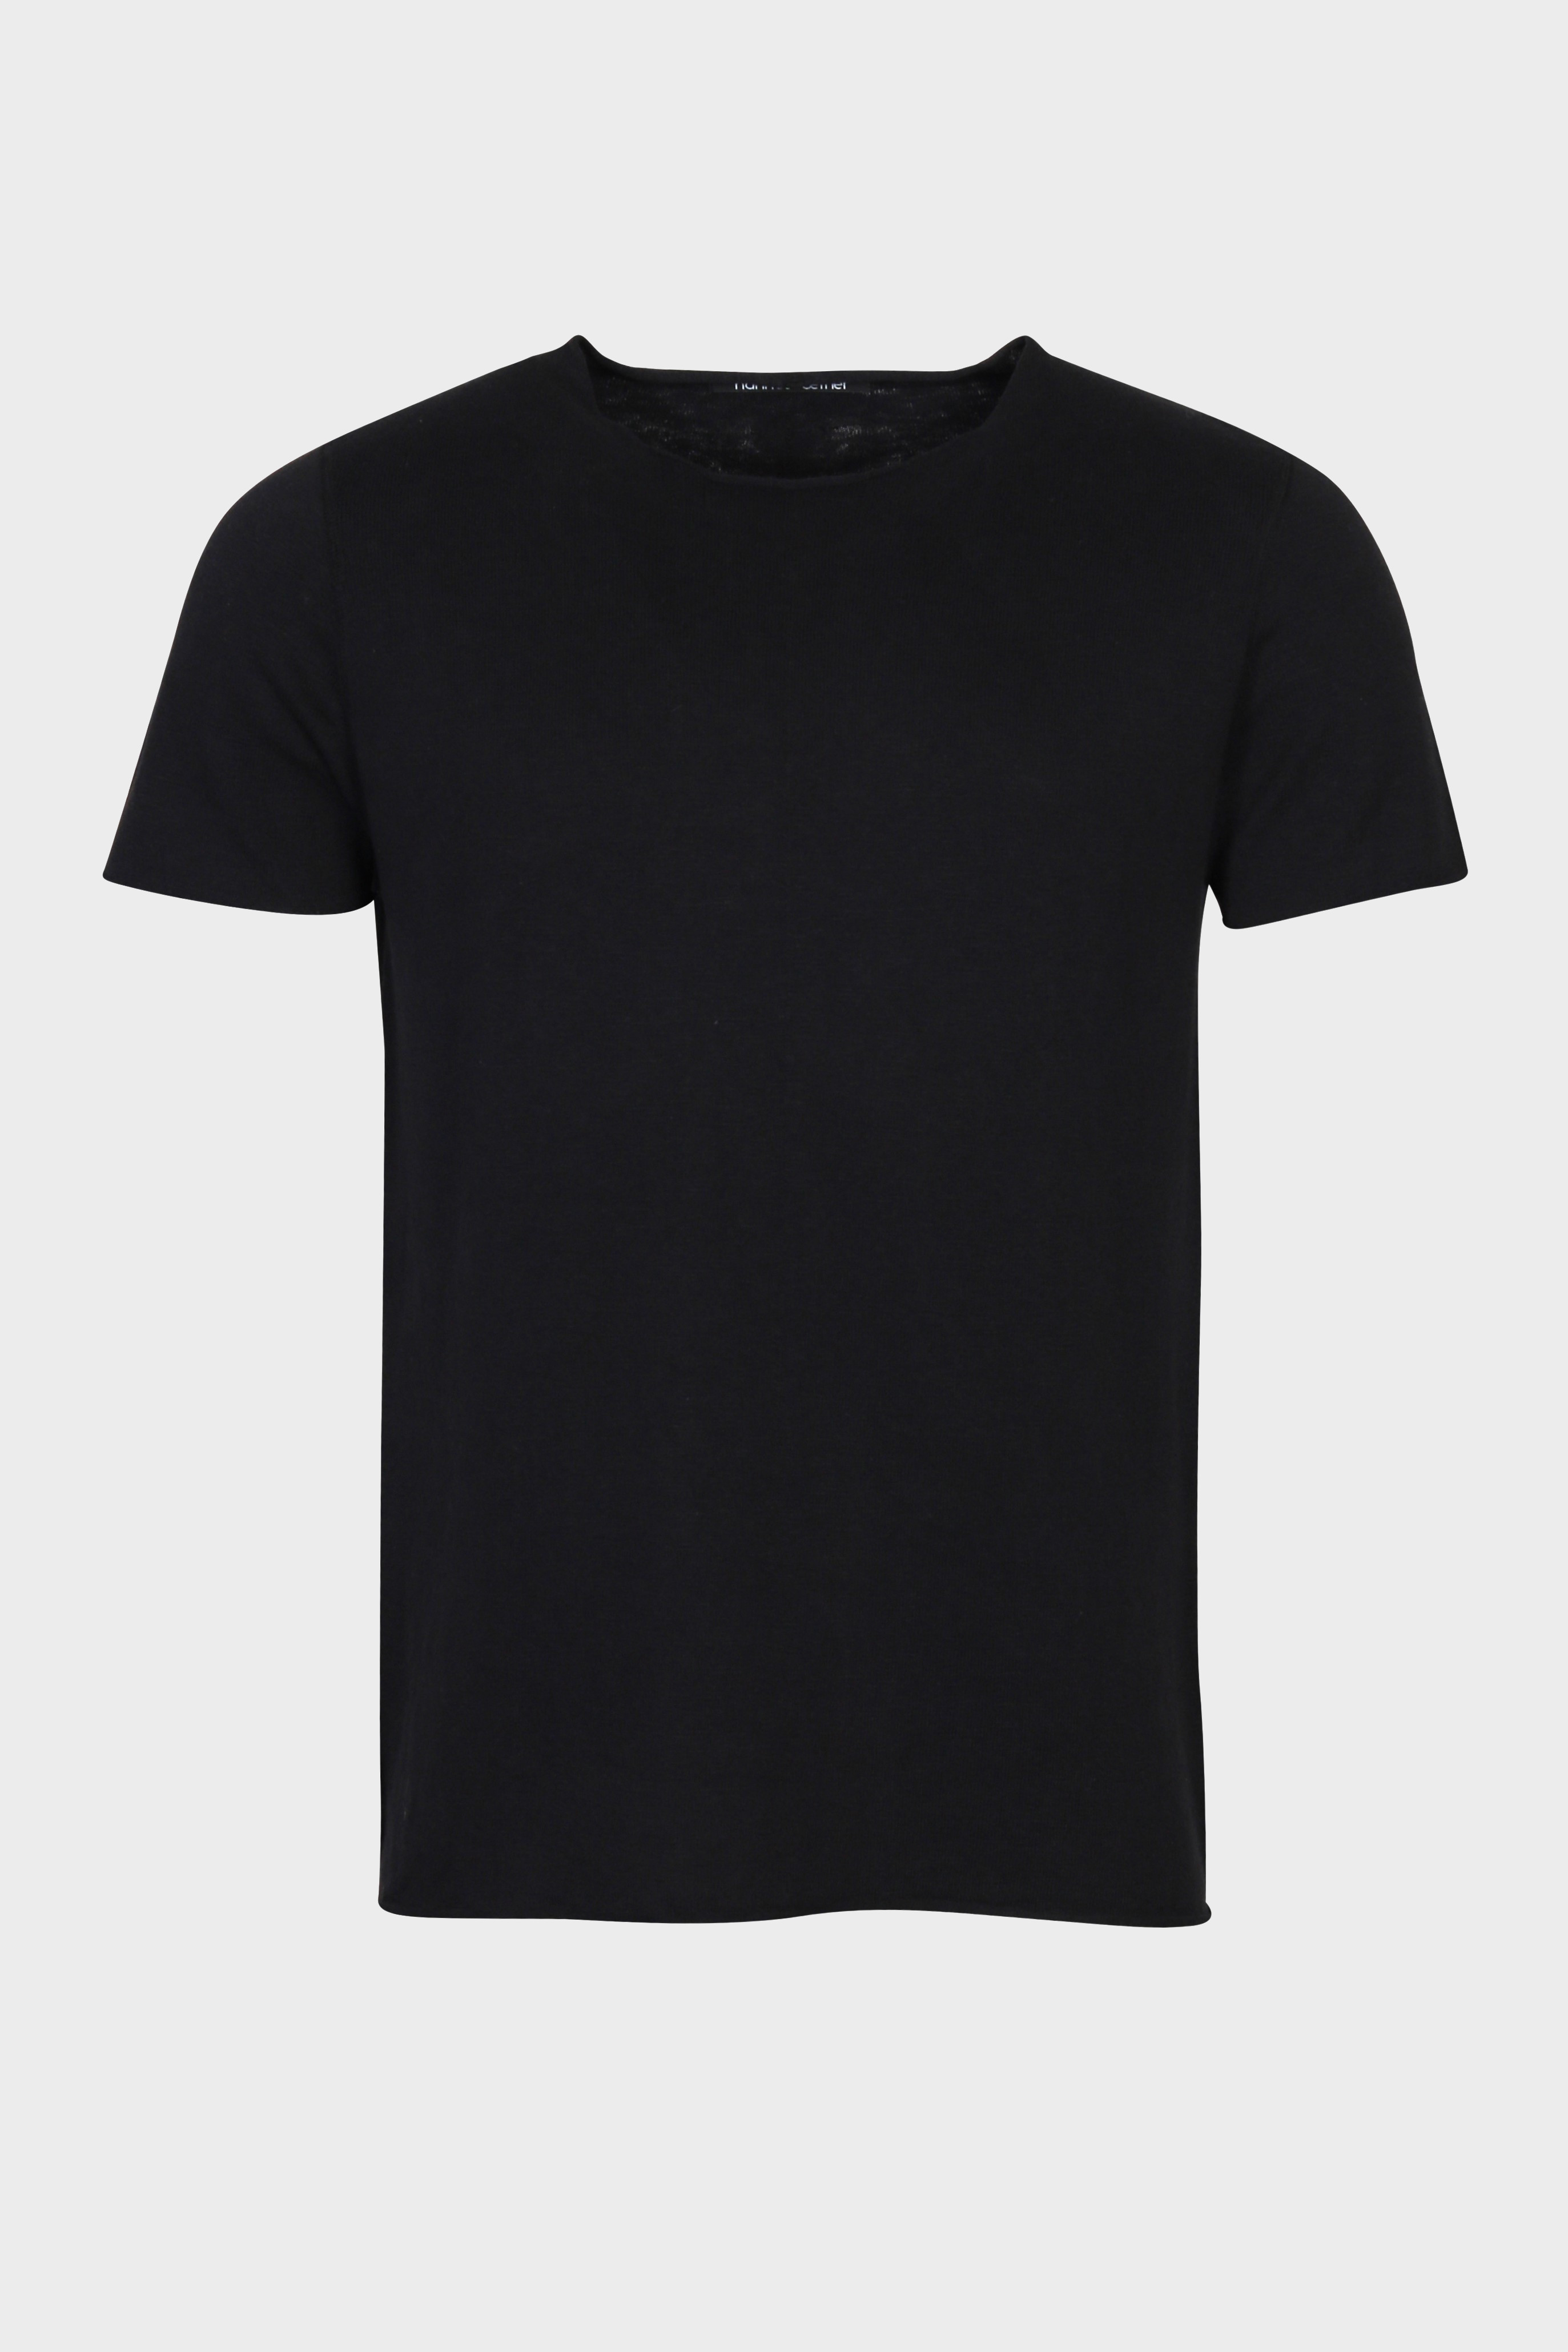 HANNES ROETHER Knit T-Shirt in Black L